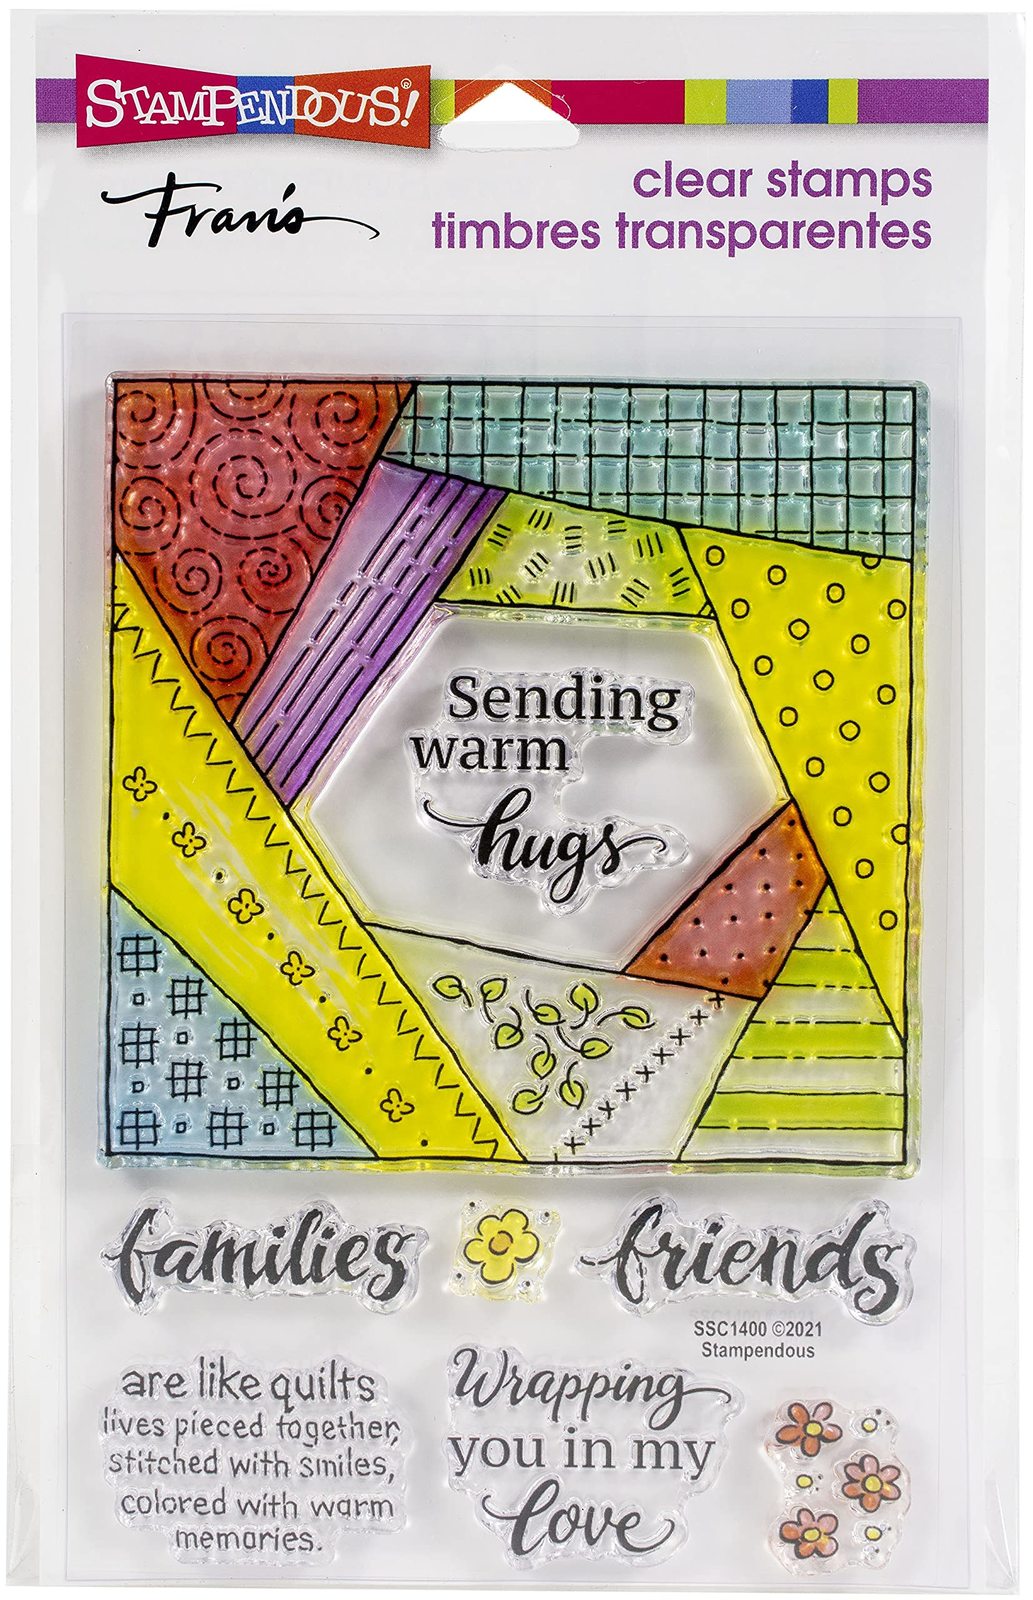 Stampendous Quilt Hugs Stamp Set Fran Seiford Stitched Patchwork Family Friend - $16.75